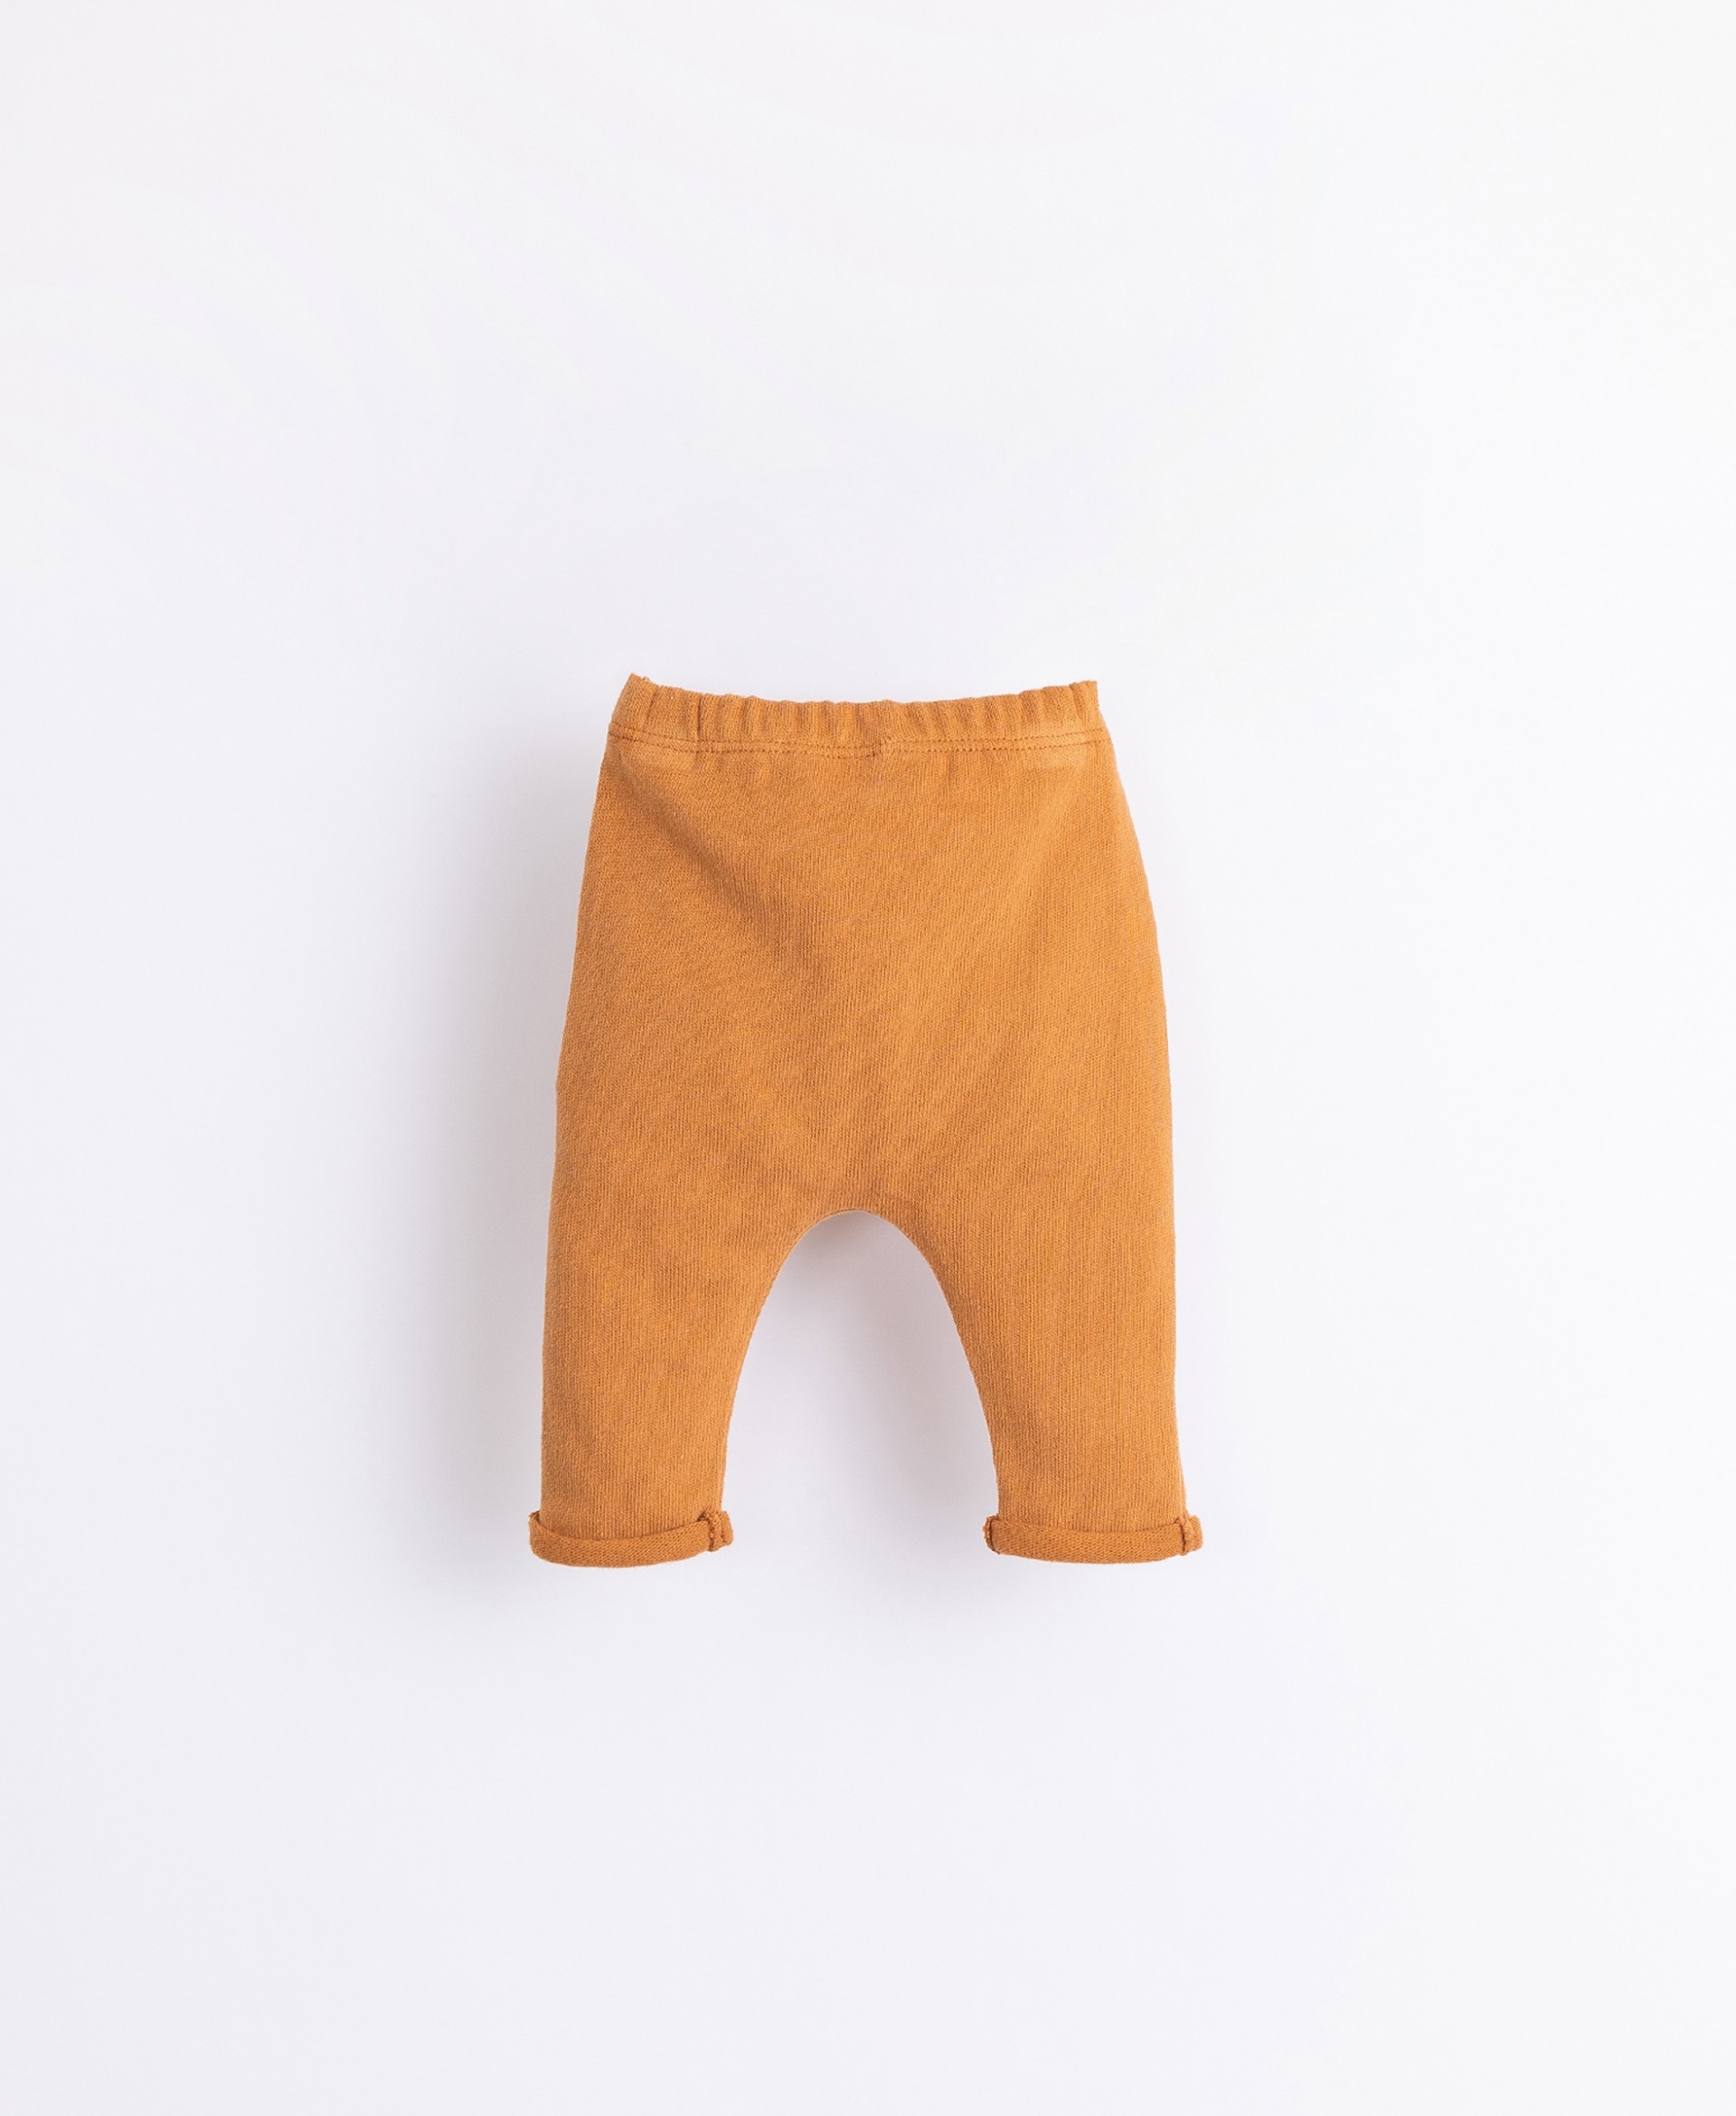 Trousers with decorative button | Illustration